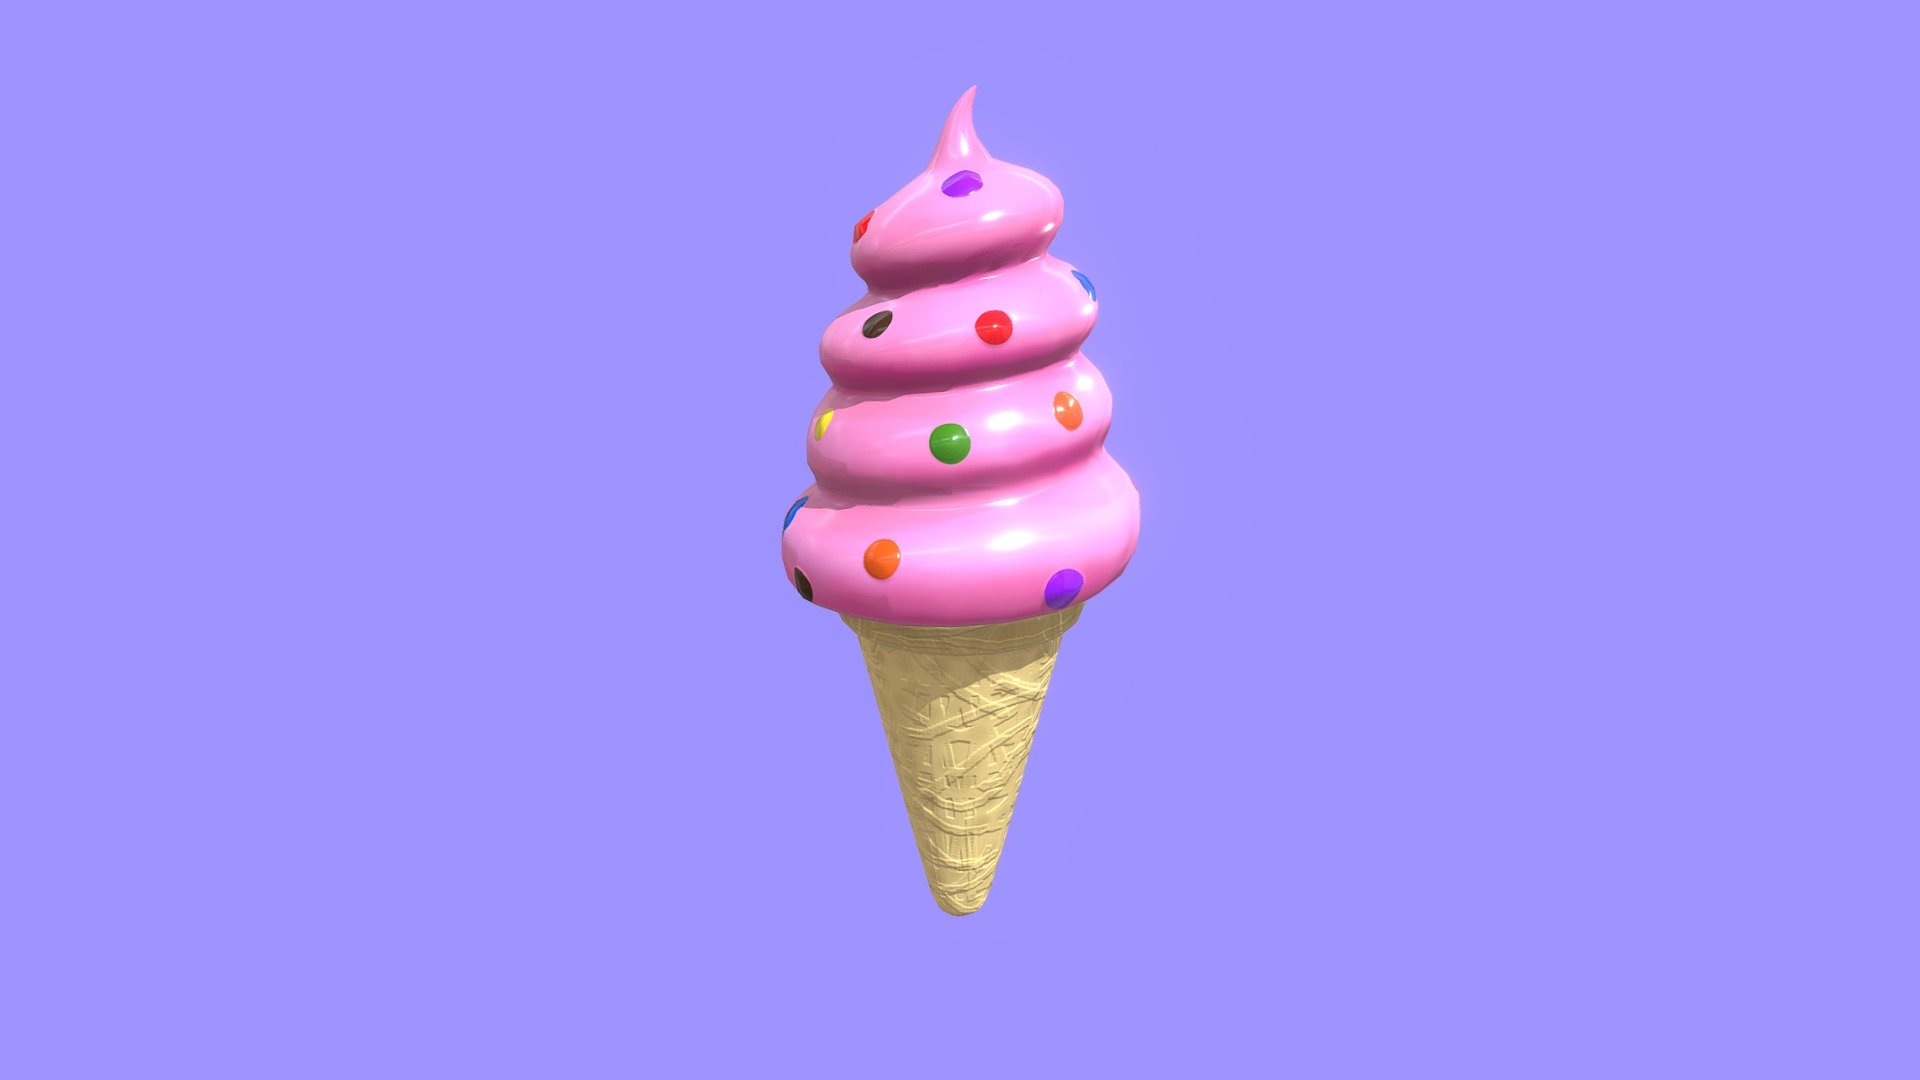 Ice cream cone, 3d model ideal for mobile games 3d model